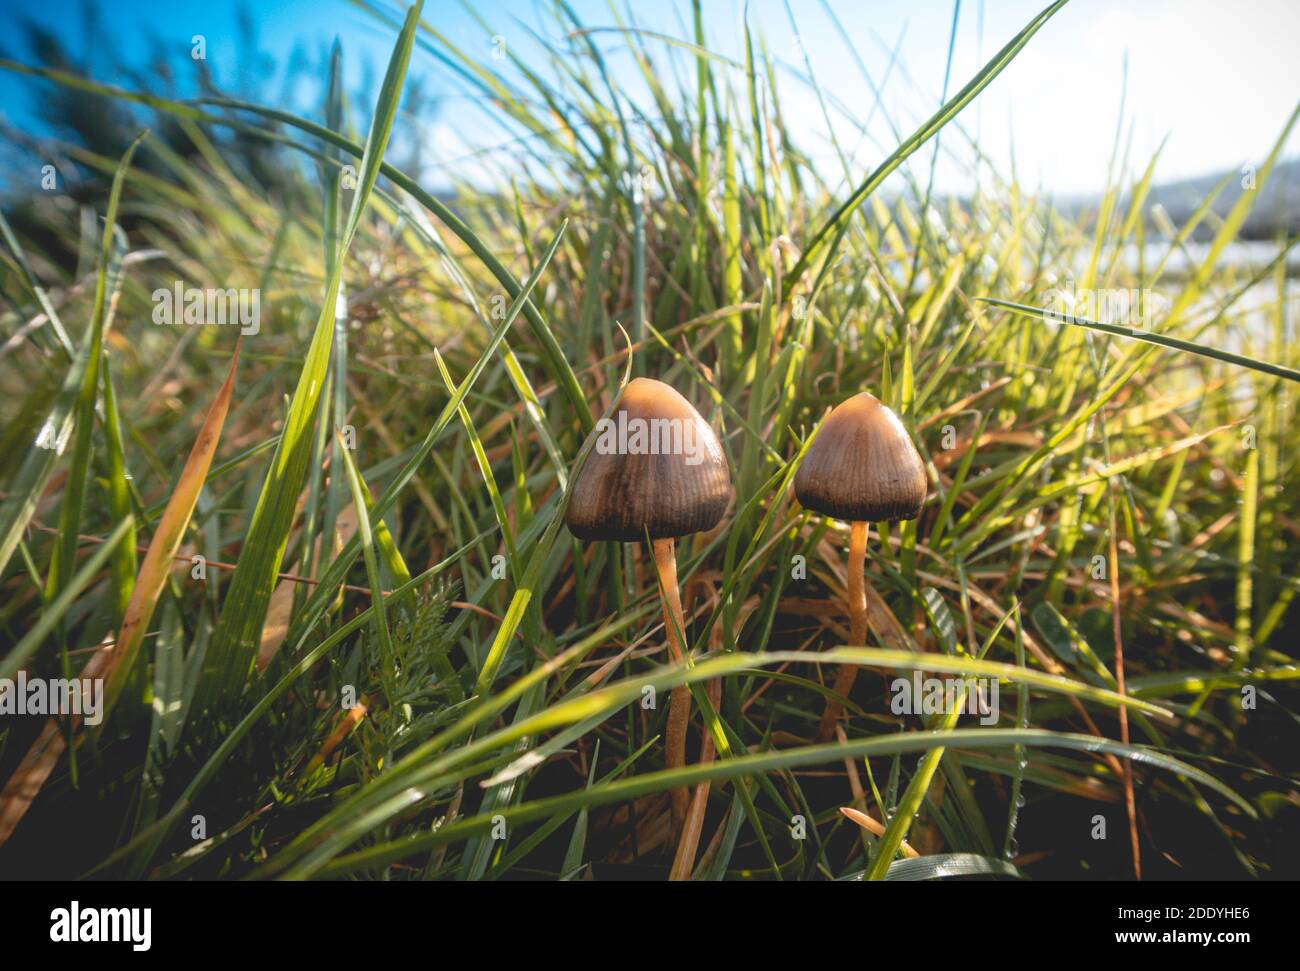 A liberty cap mushroom (Psilocybe semilanceata), known for its hallucinogenic properties, grows in a grassy field in southwest Ireland Stock Photo